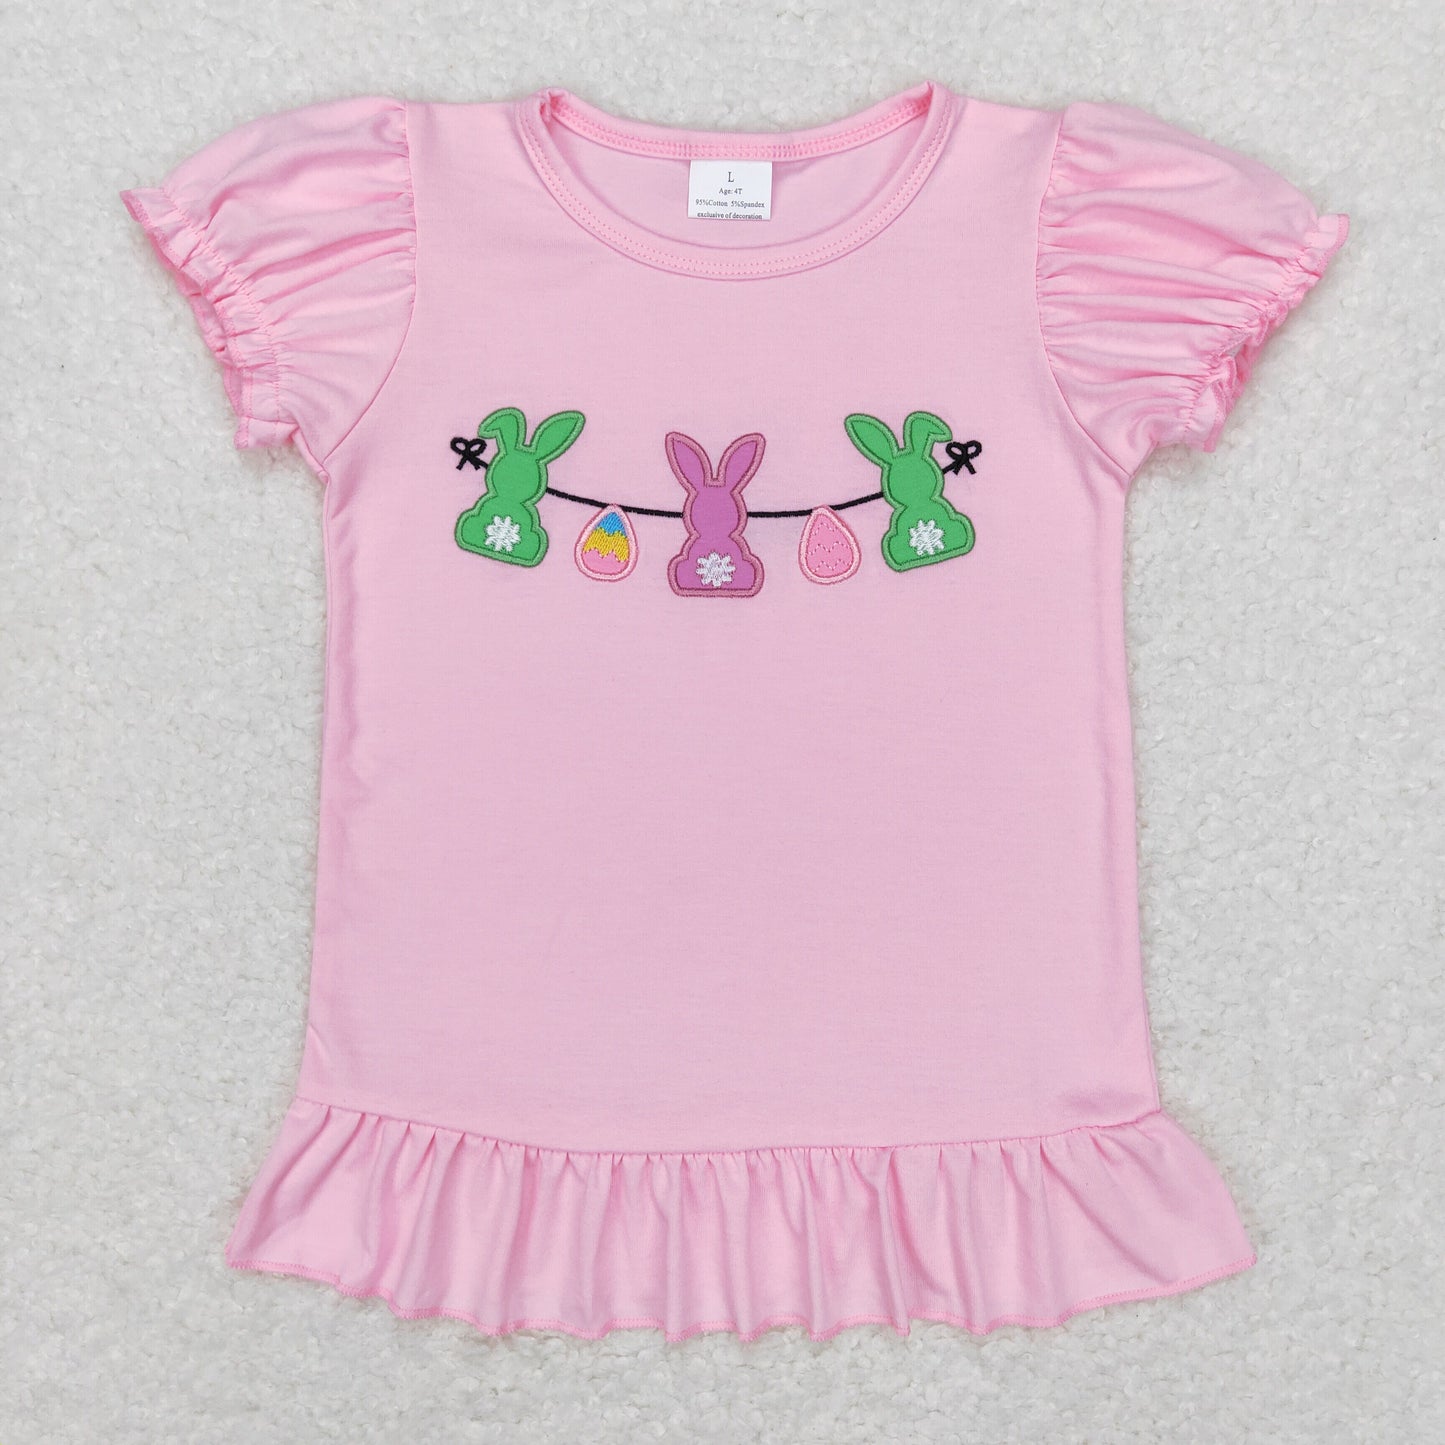 embroidery easter bunny eggs pink short sleeve shirt